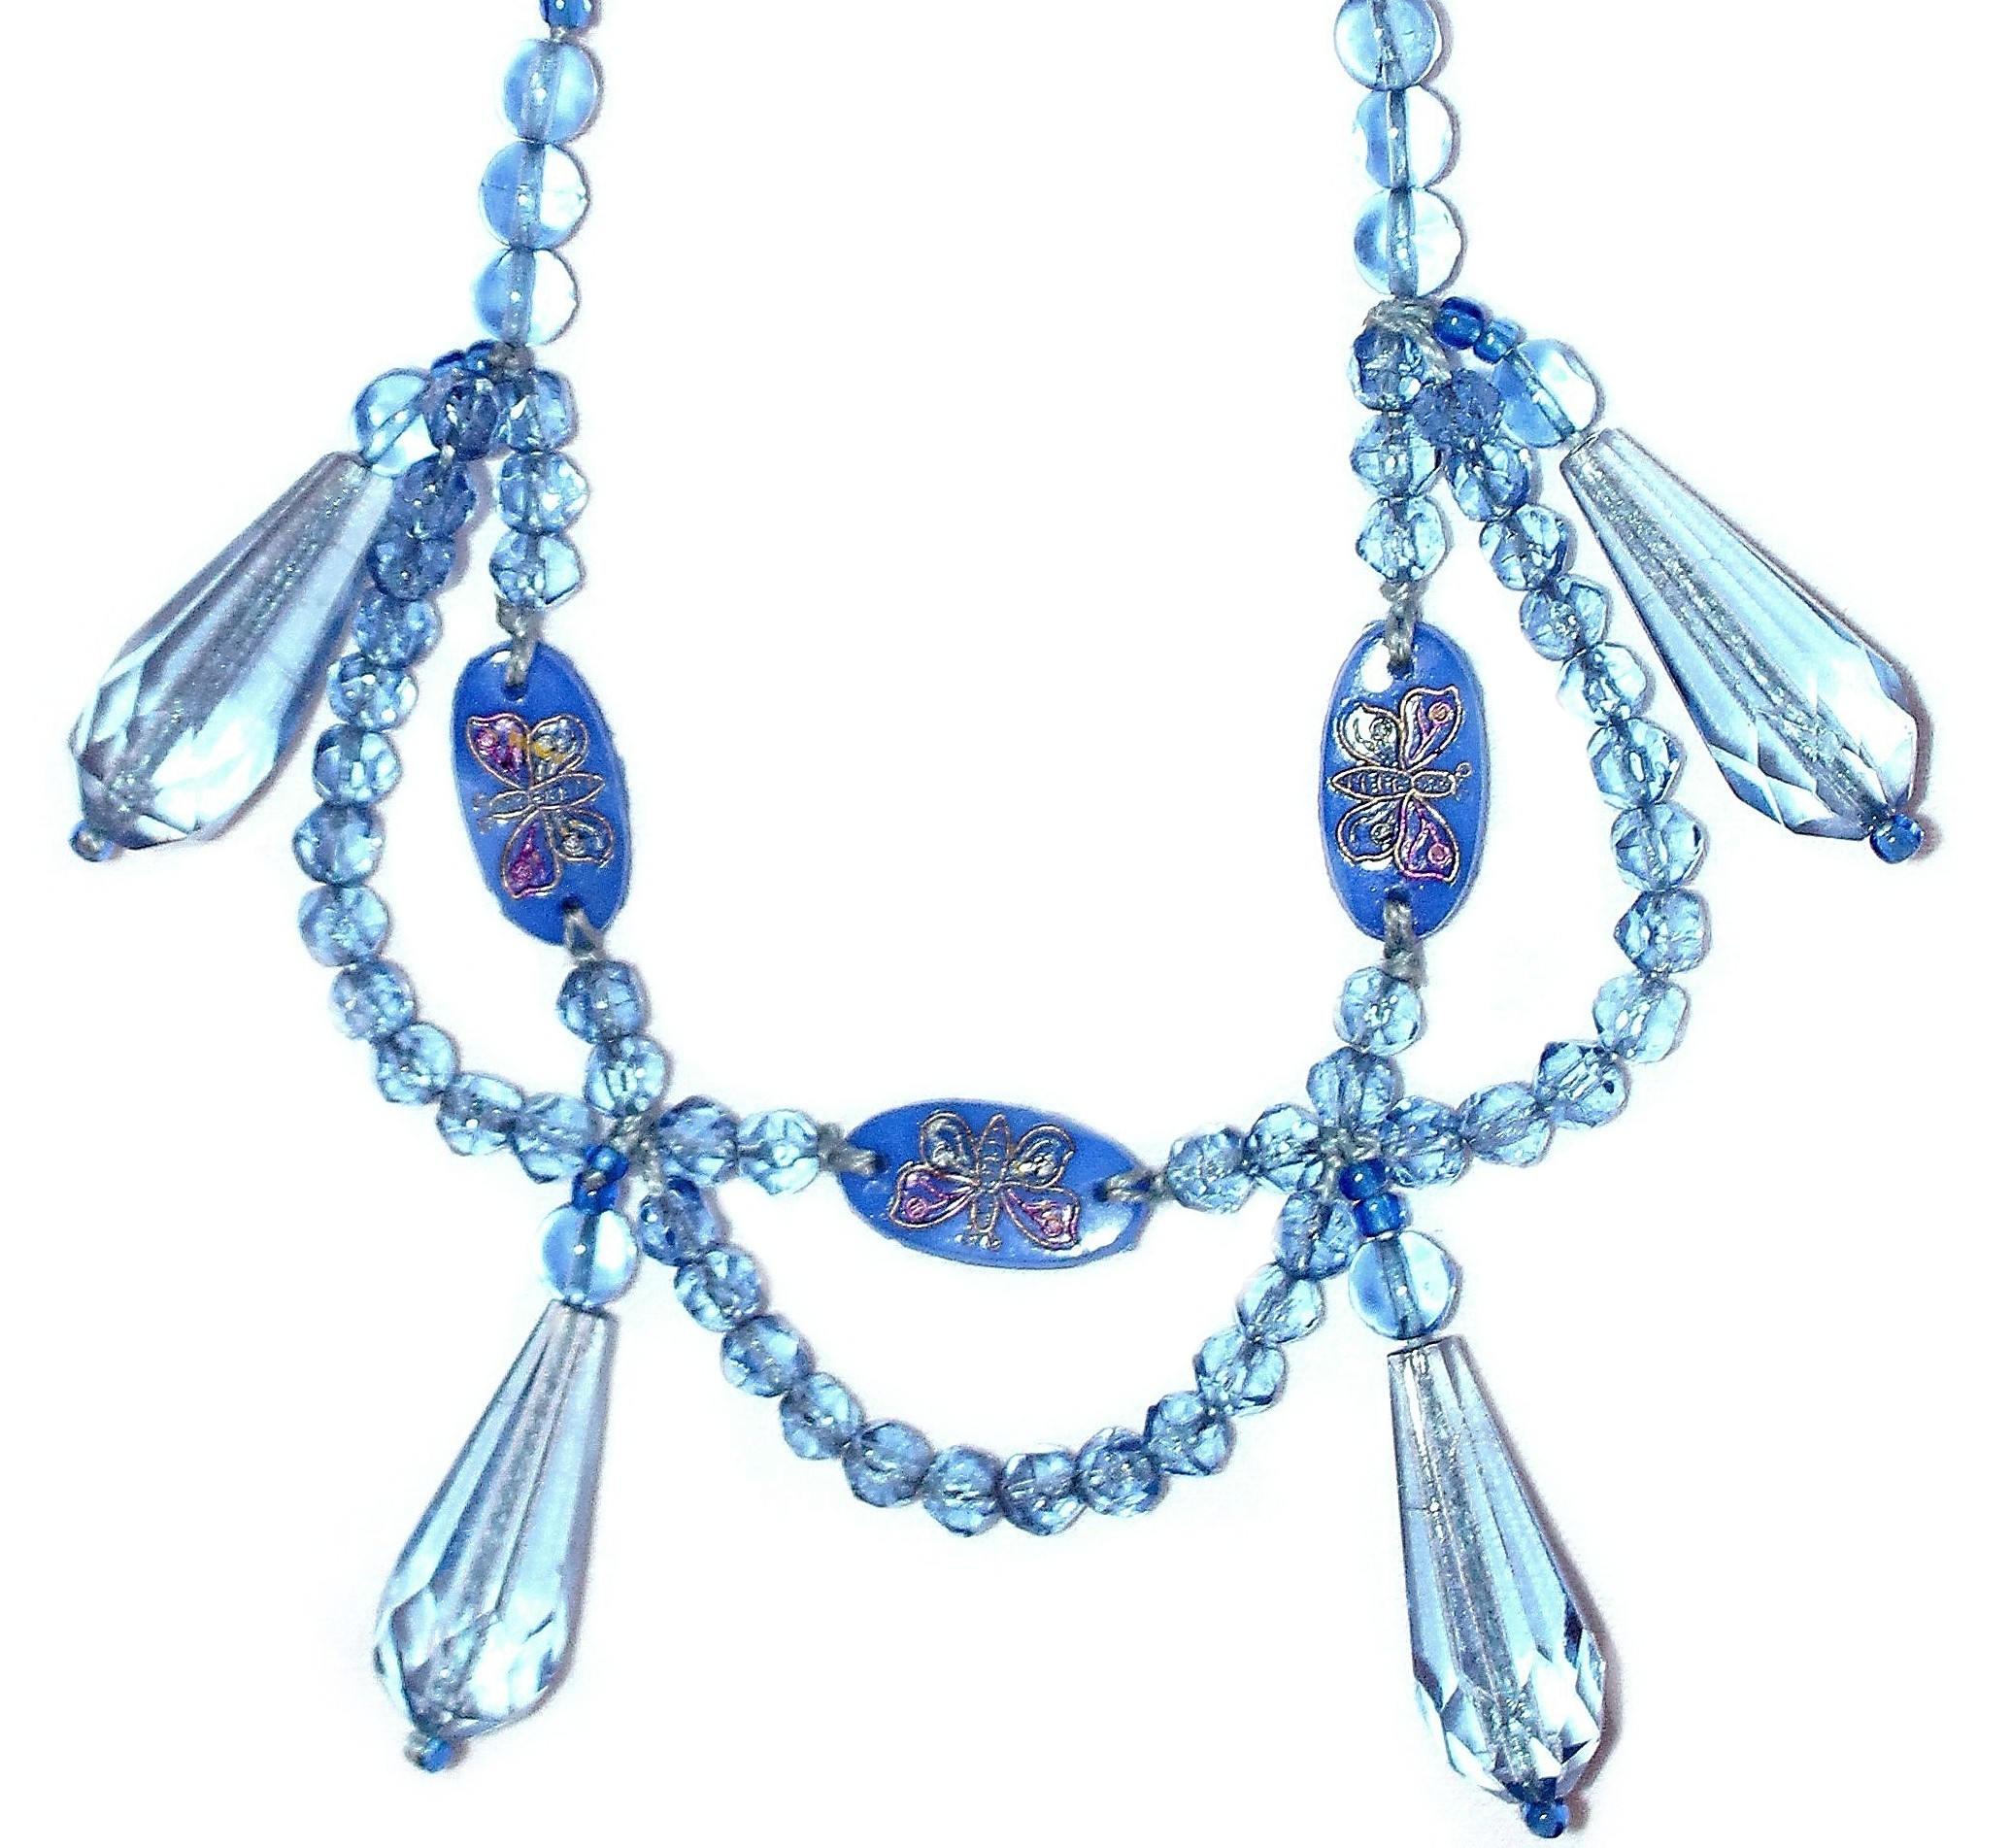 Art Deco 1920s Light Blue Faceted Glass Swag Necklace With Handpainted Butterflies